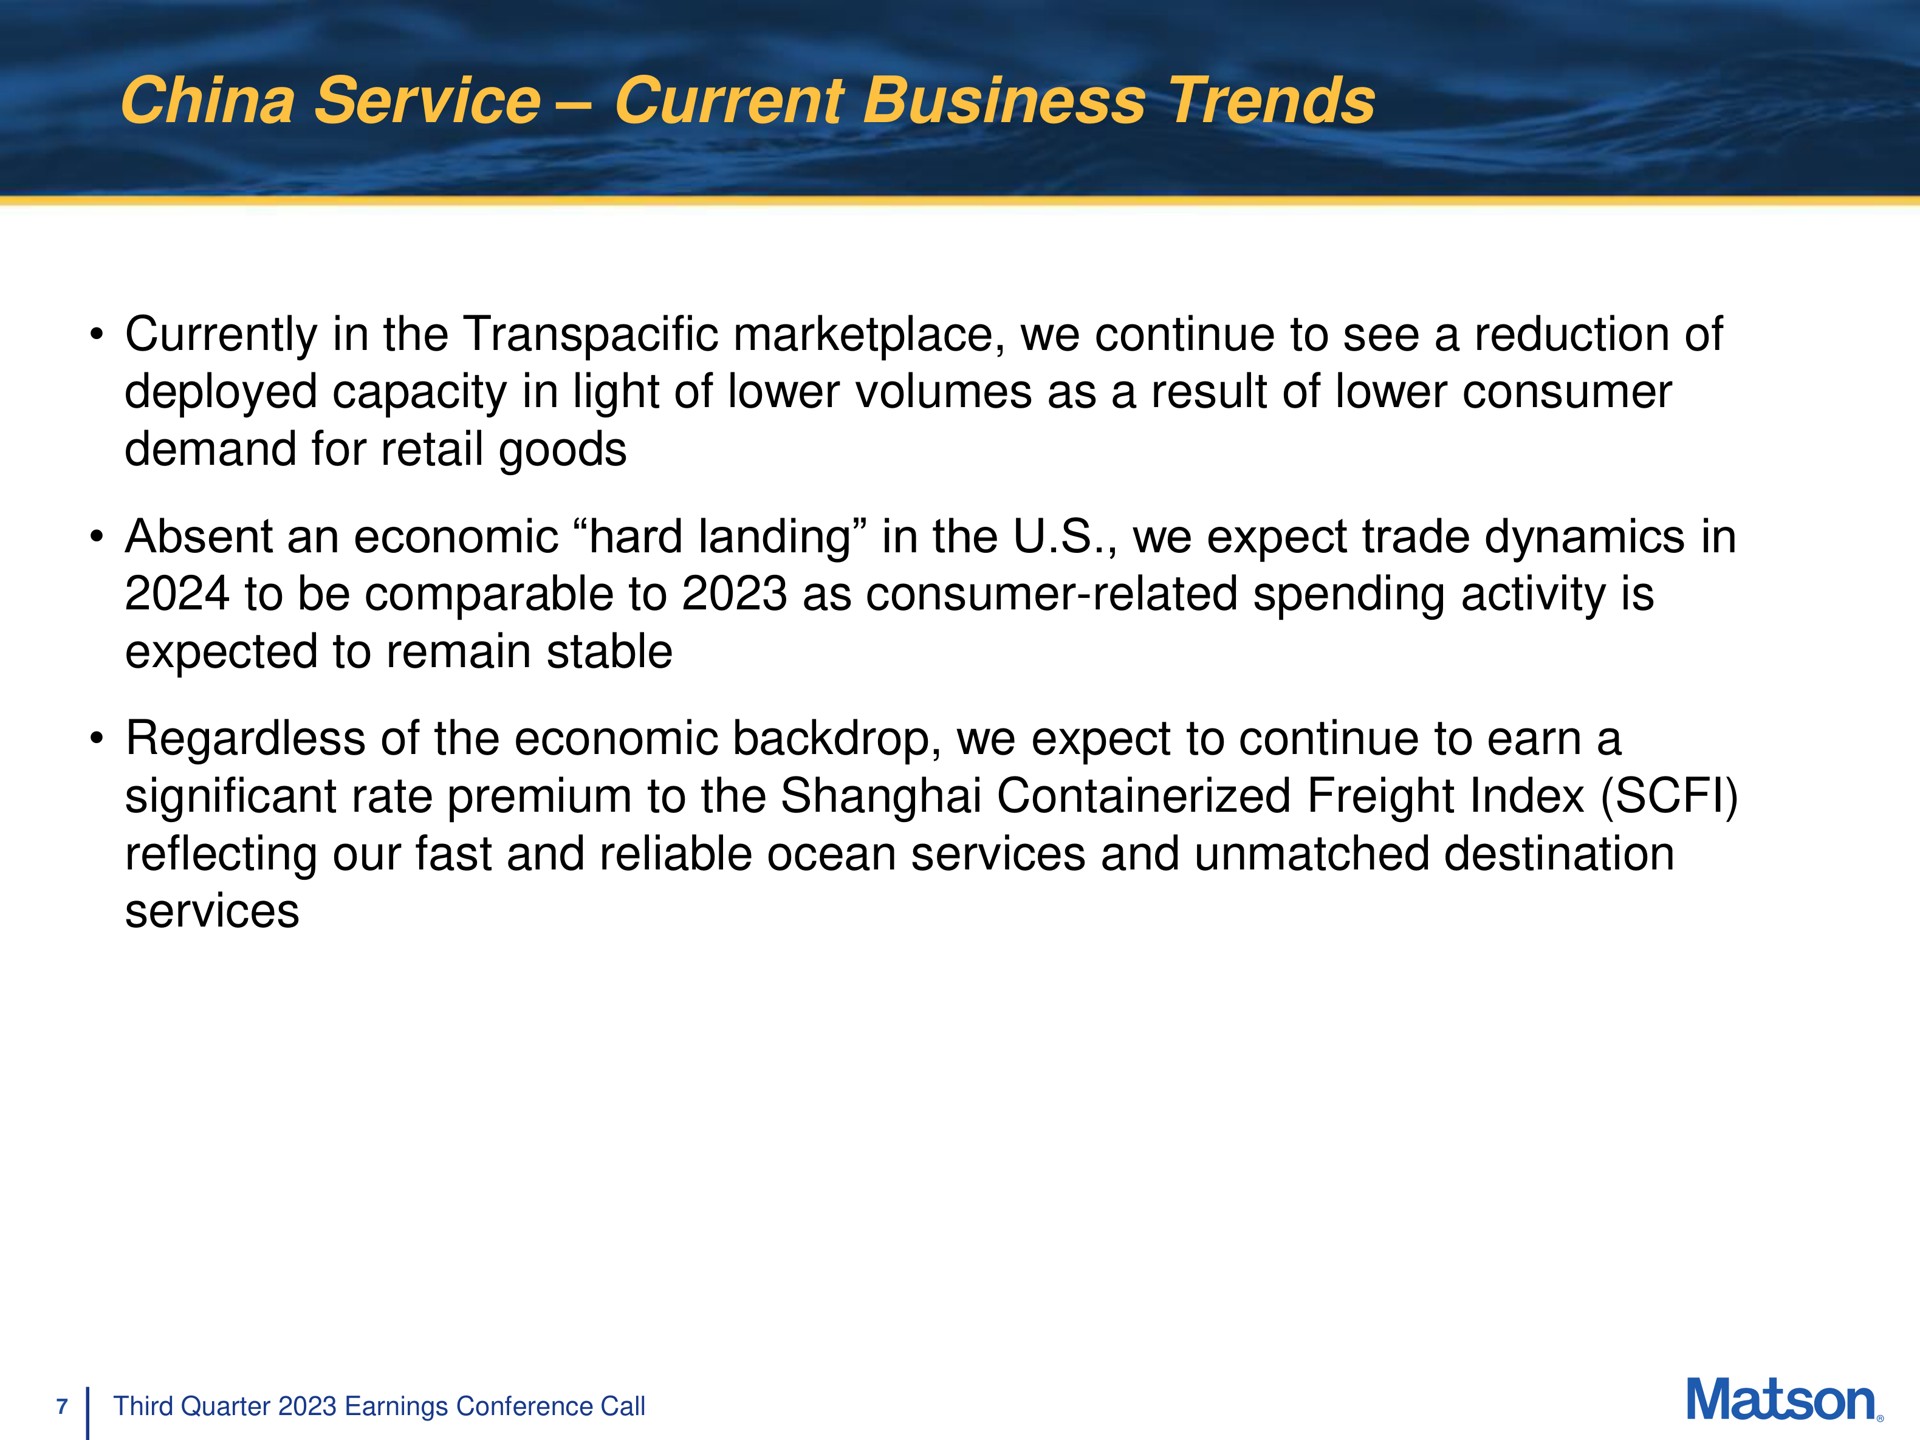 china service current business trends currently in the transpacific we continue to see a reduction of deployed capacity in light of lower volumes as a result of lower consumer demand for retail goods absent an economic hard landing in the we expect trade dynamics in to be comparable to as consumer related spending activity is expected to remain stable regardless of the economic backdrop we expect to continue to earn a significant rate premium to the shanghai freight index reflecting our fast and reliable ocean services and unmatched destination services | Matson